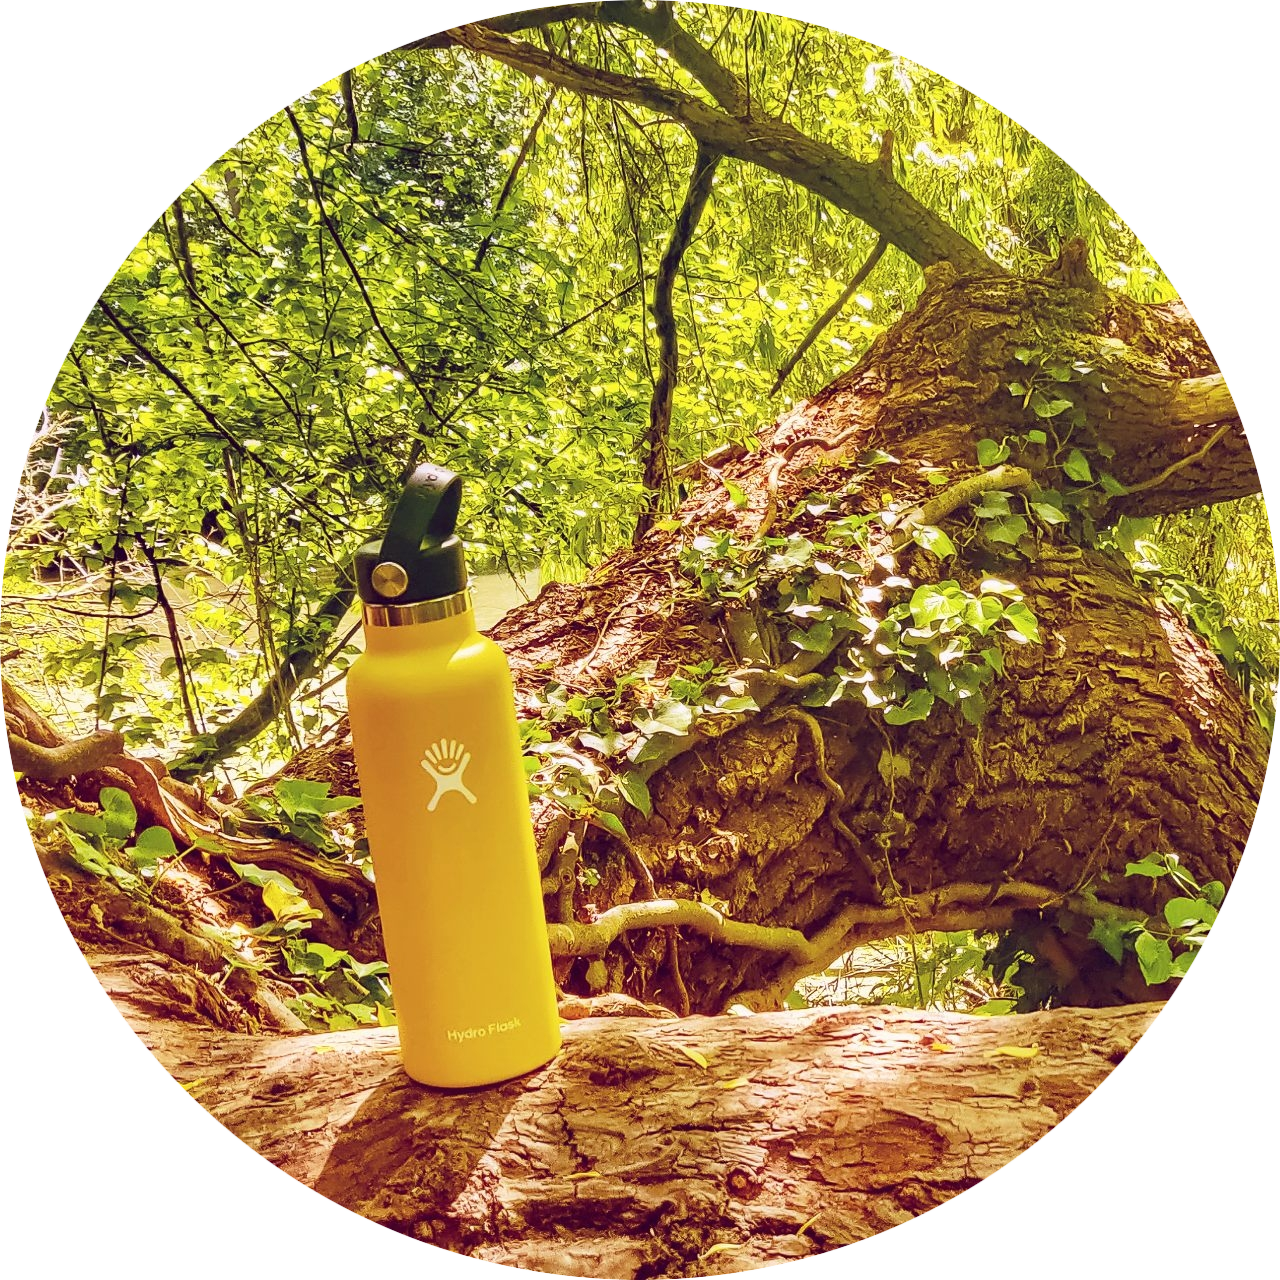 Hydroflask review